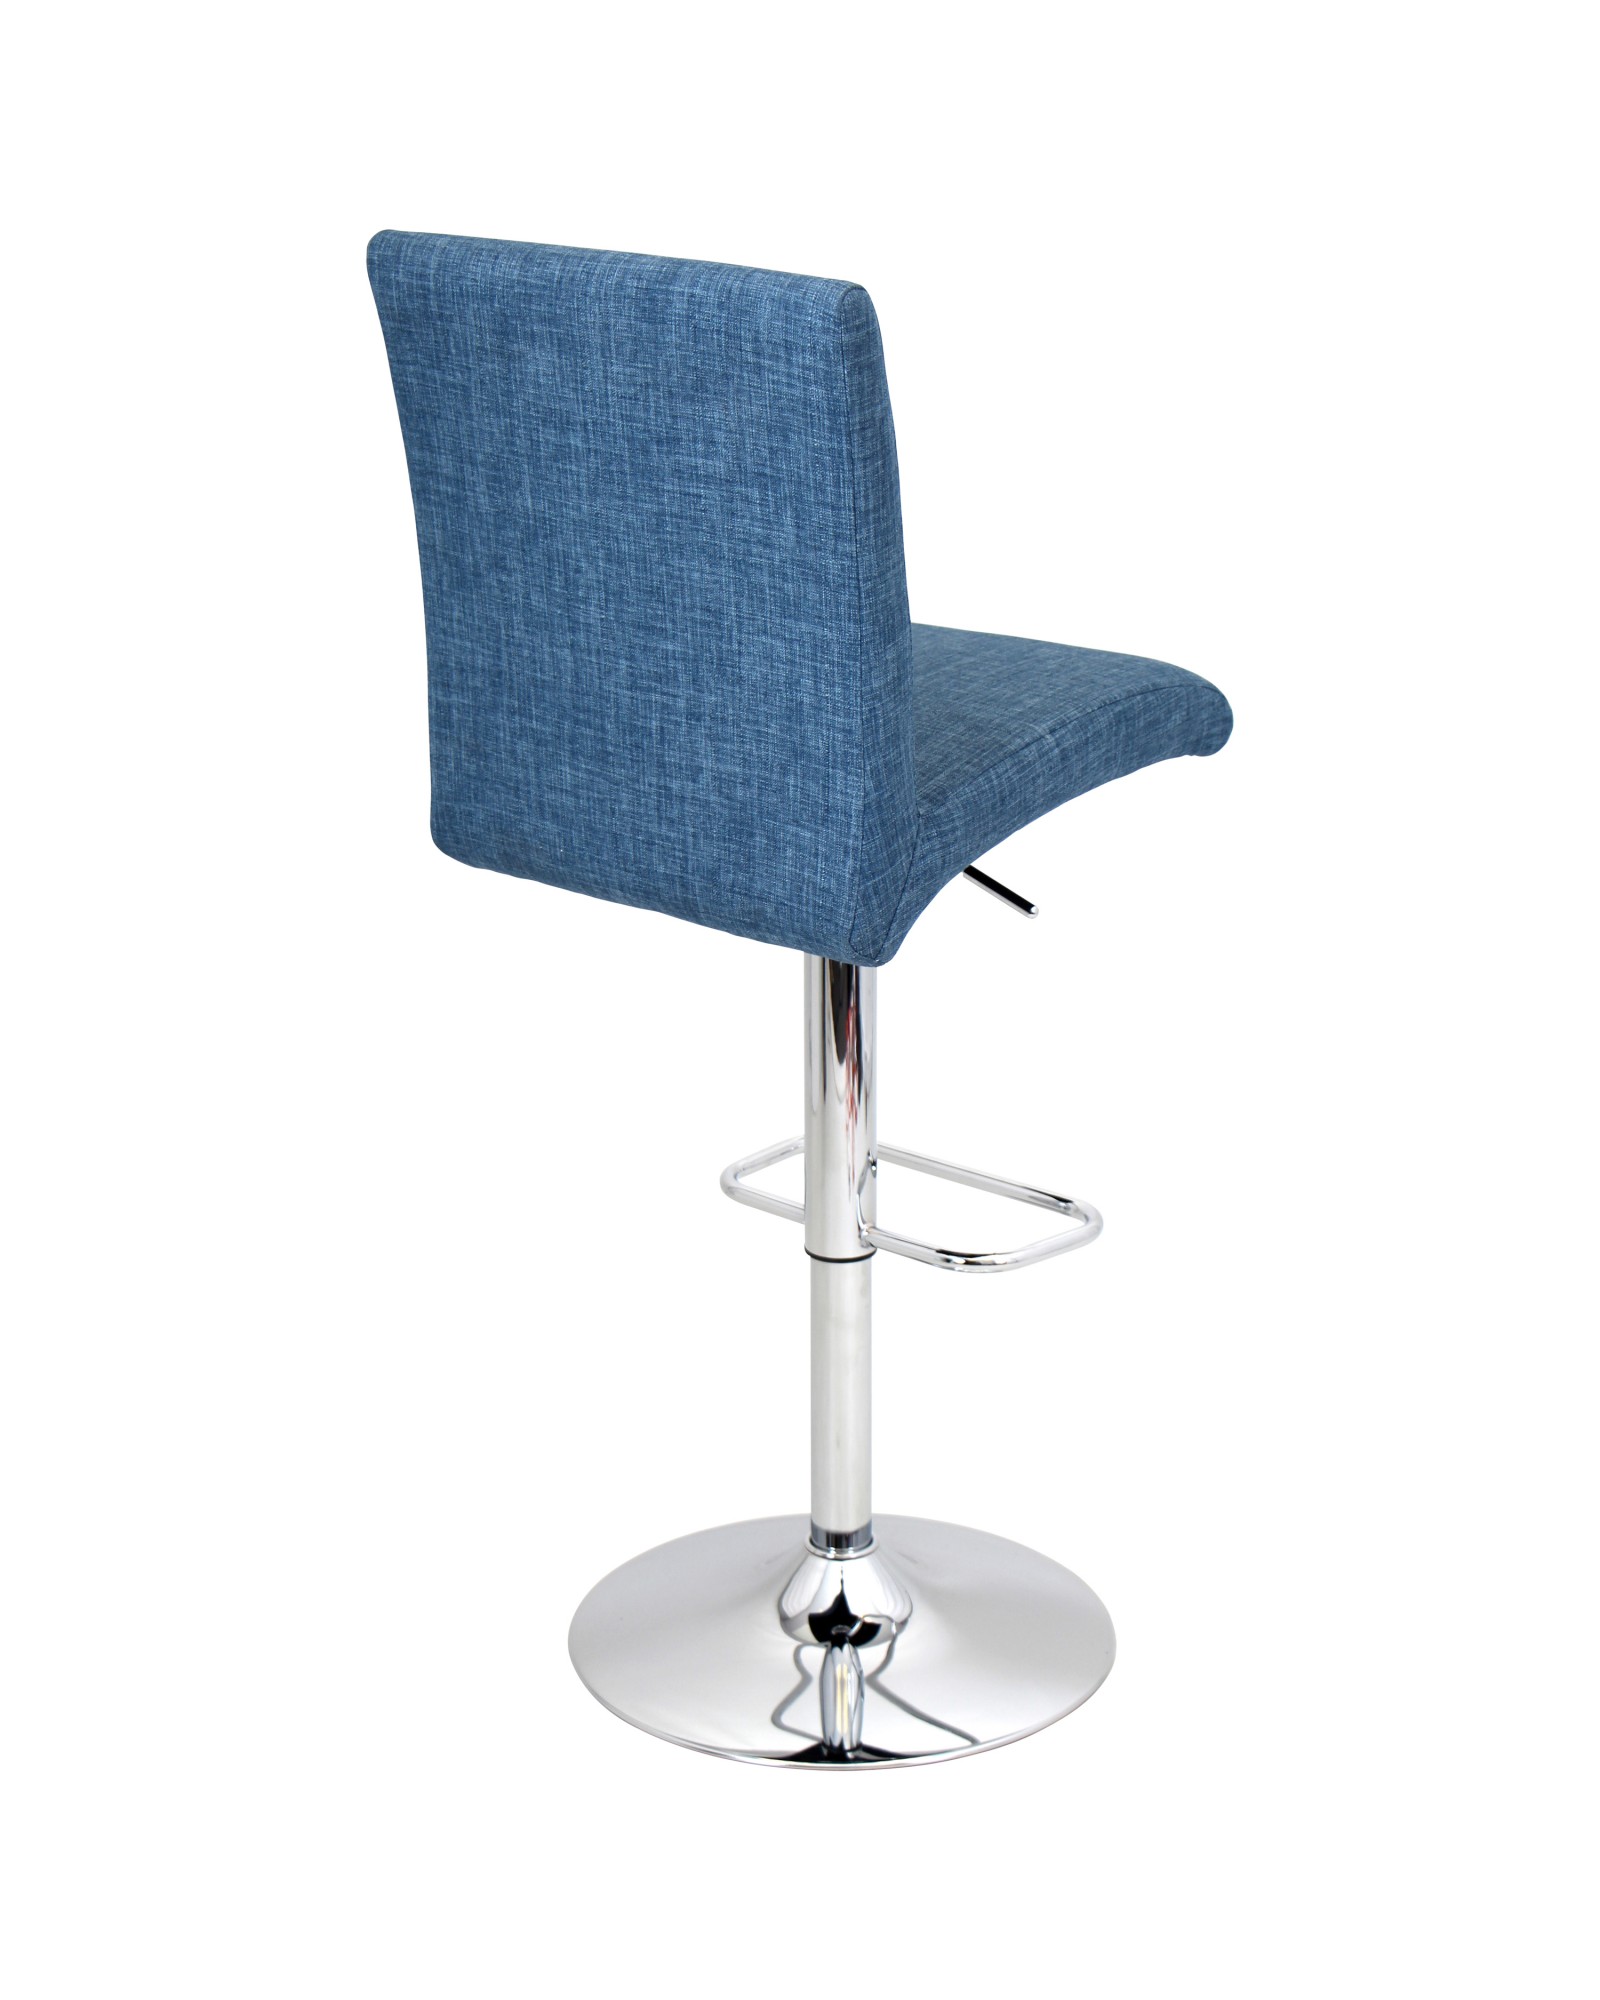 Tintori Contemporary Adjustable Barstool with Swivel in Blue